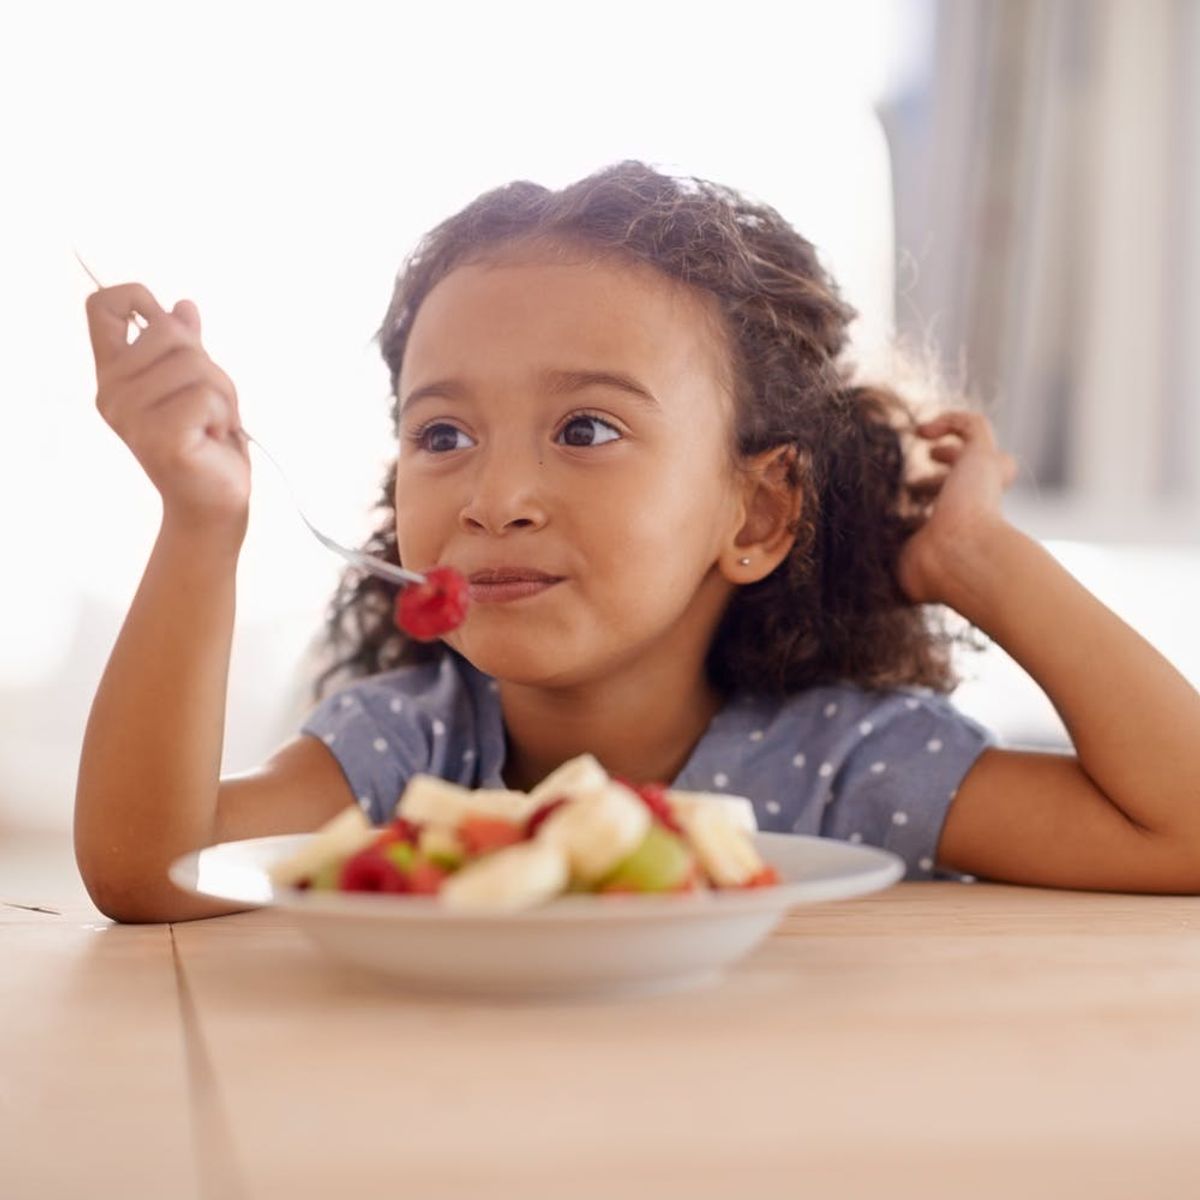 8 Need-to-Know Nutrition Tips for Parents and Kids